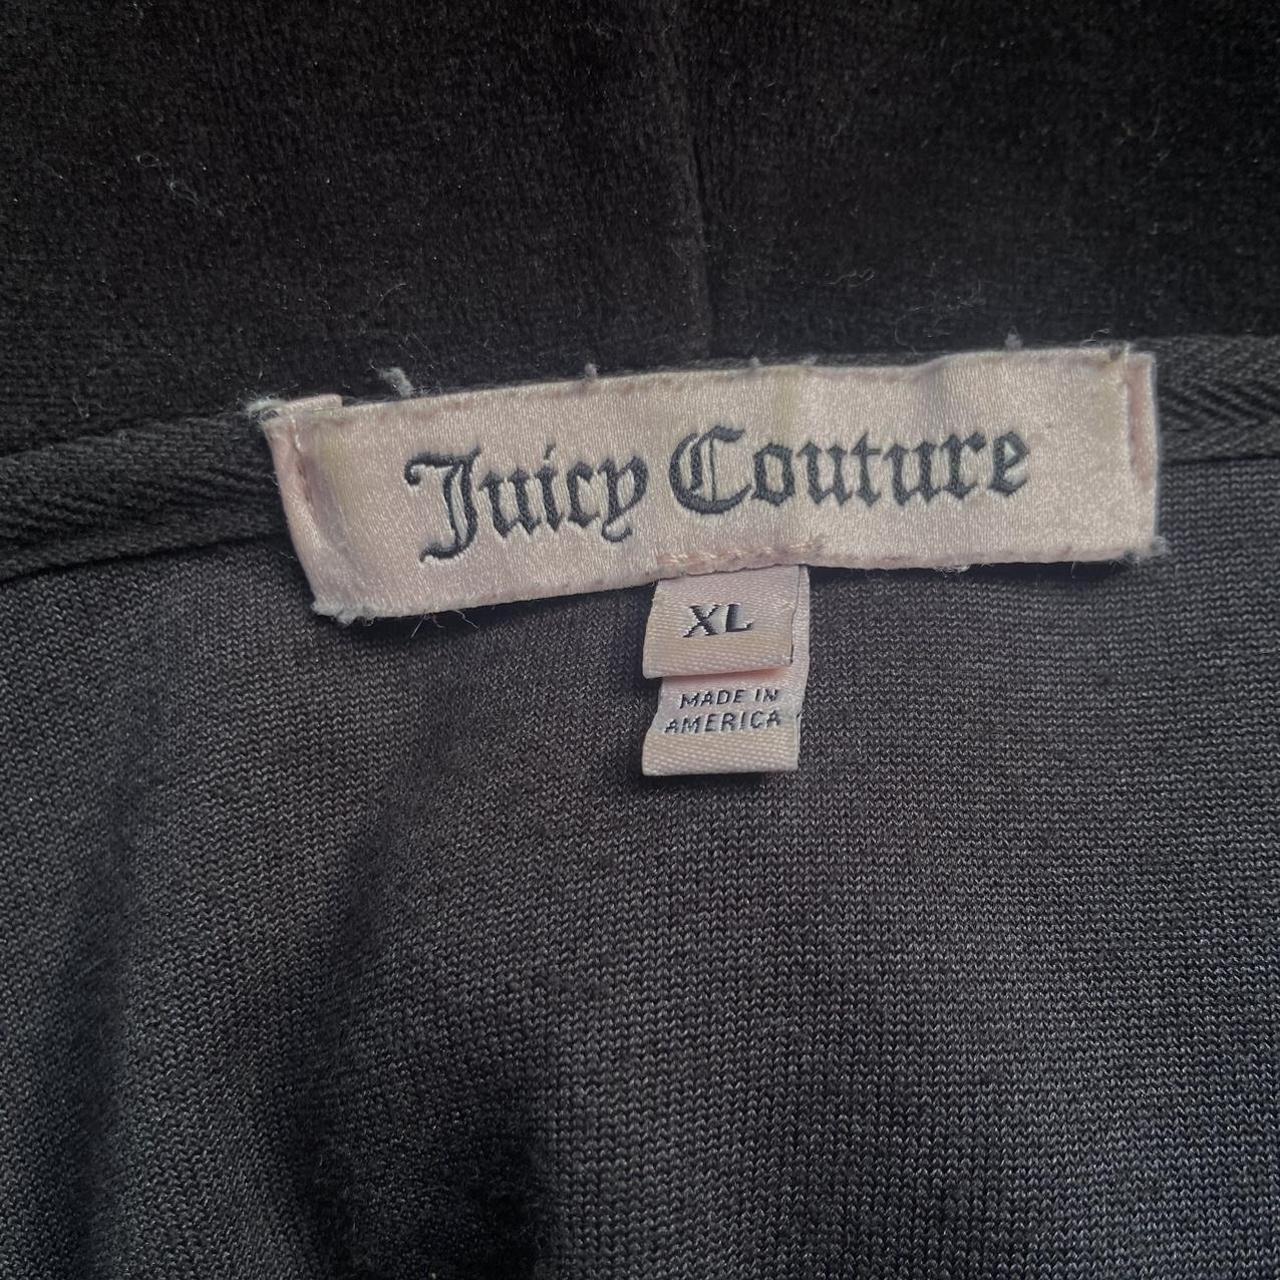 Juicy couture jacket soo cute text me first before... - Depop